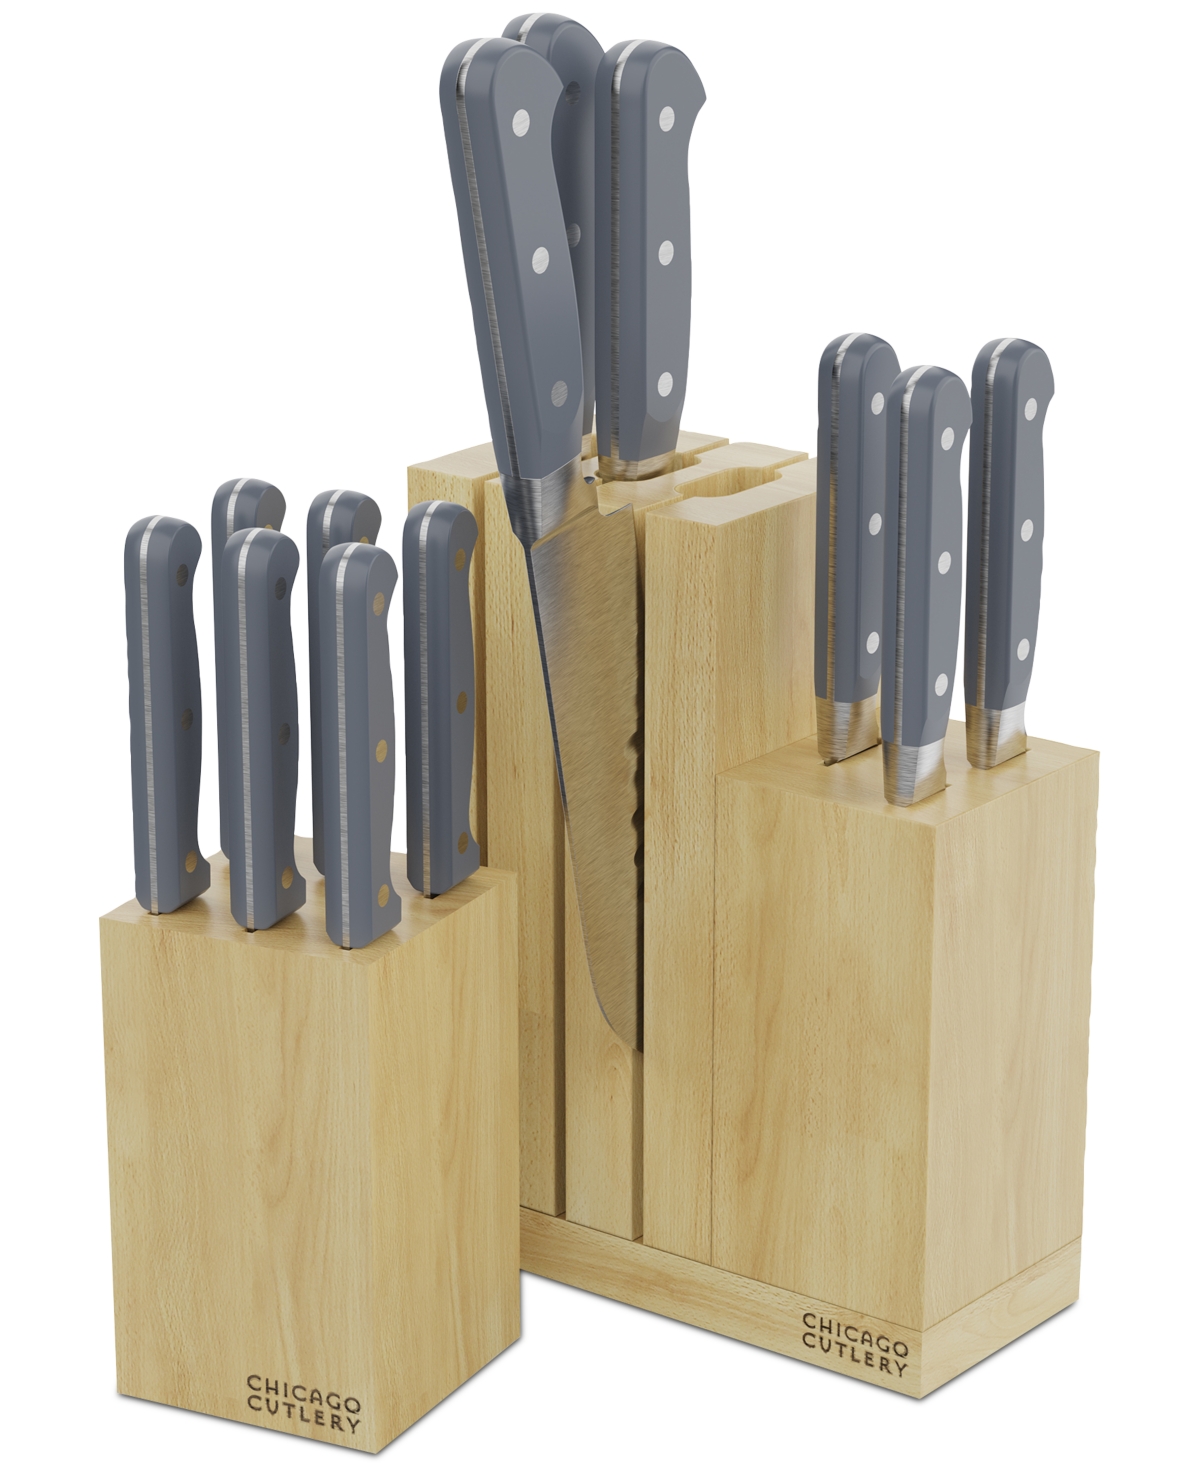 Chicago Cutlery Halsted 14-pc. Modular Block Knife Set In Cc Halsted Pc Set